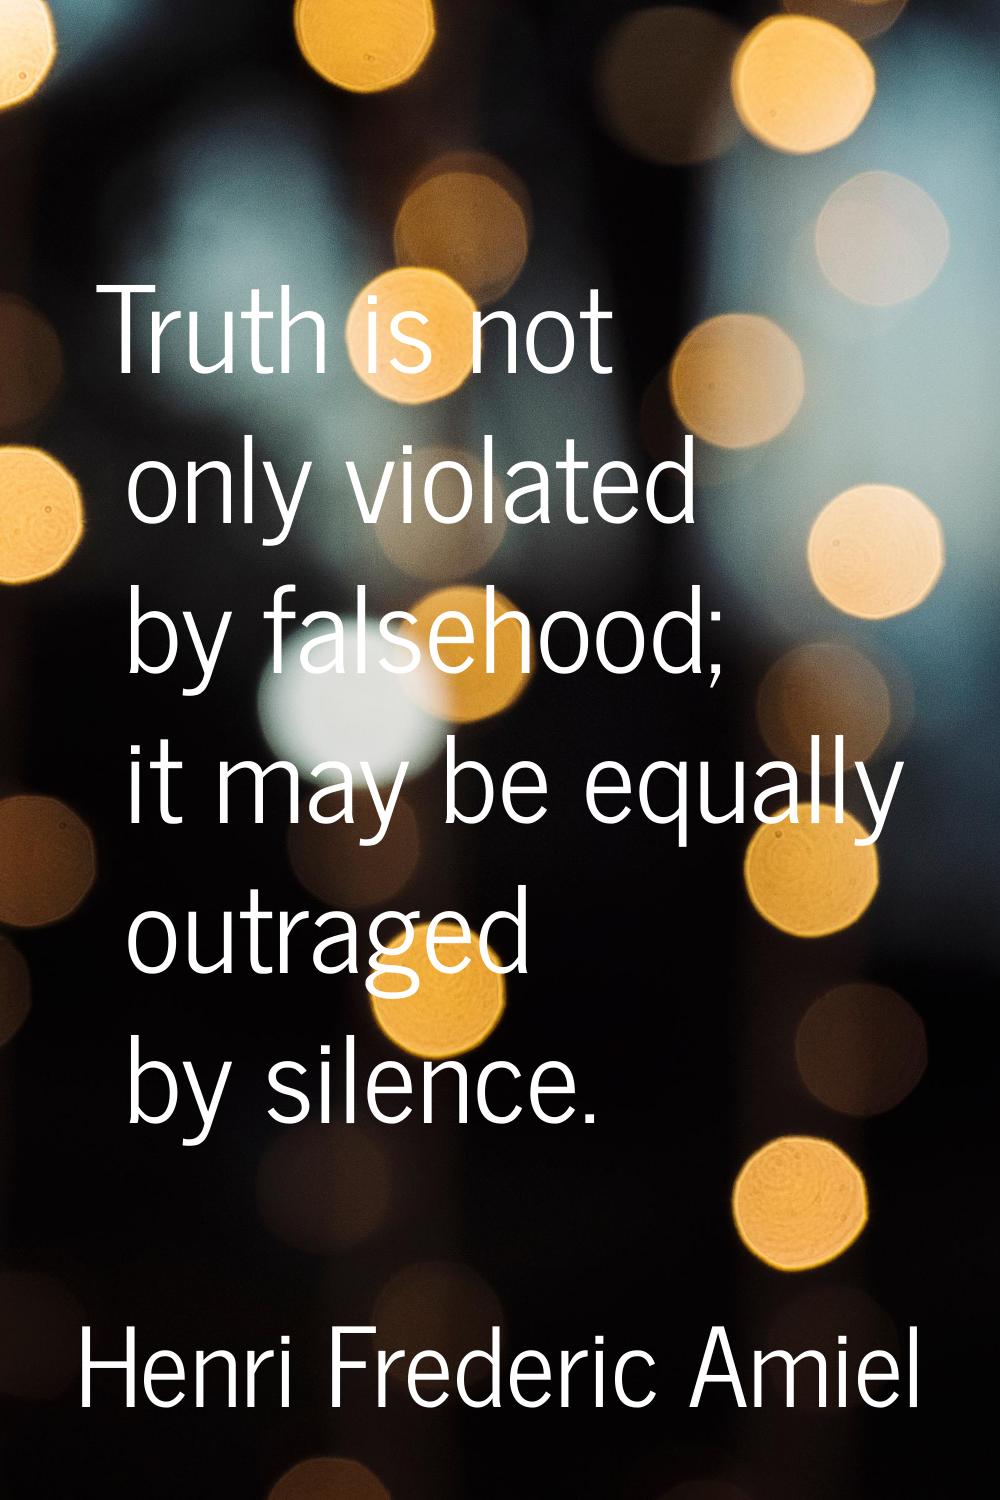 Truth is not only violated by falsehood; it may be equally outraged by silence.